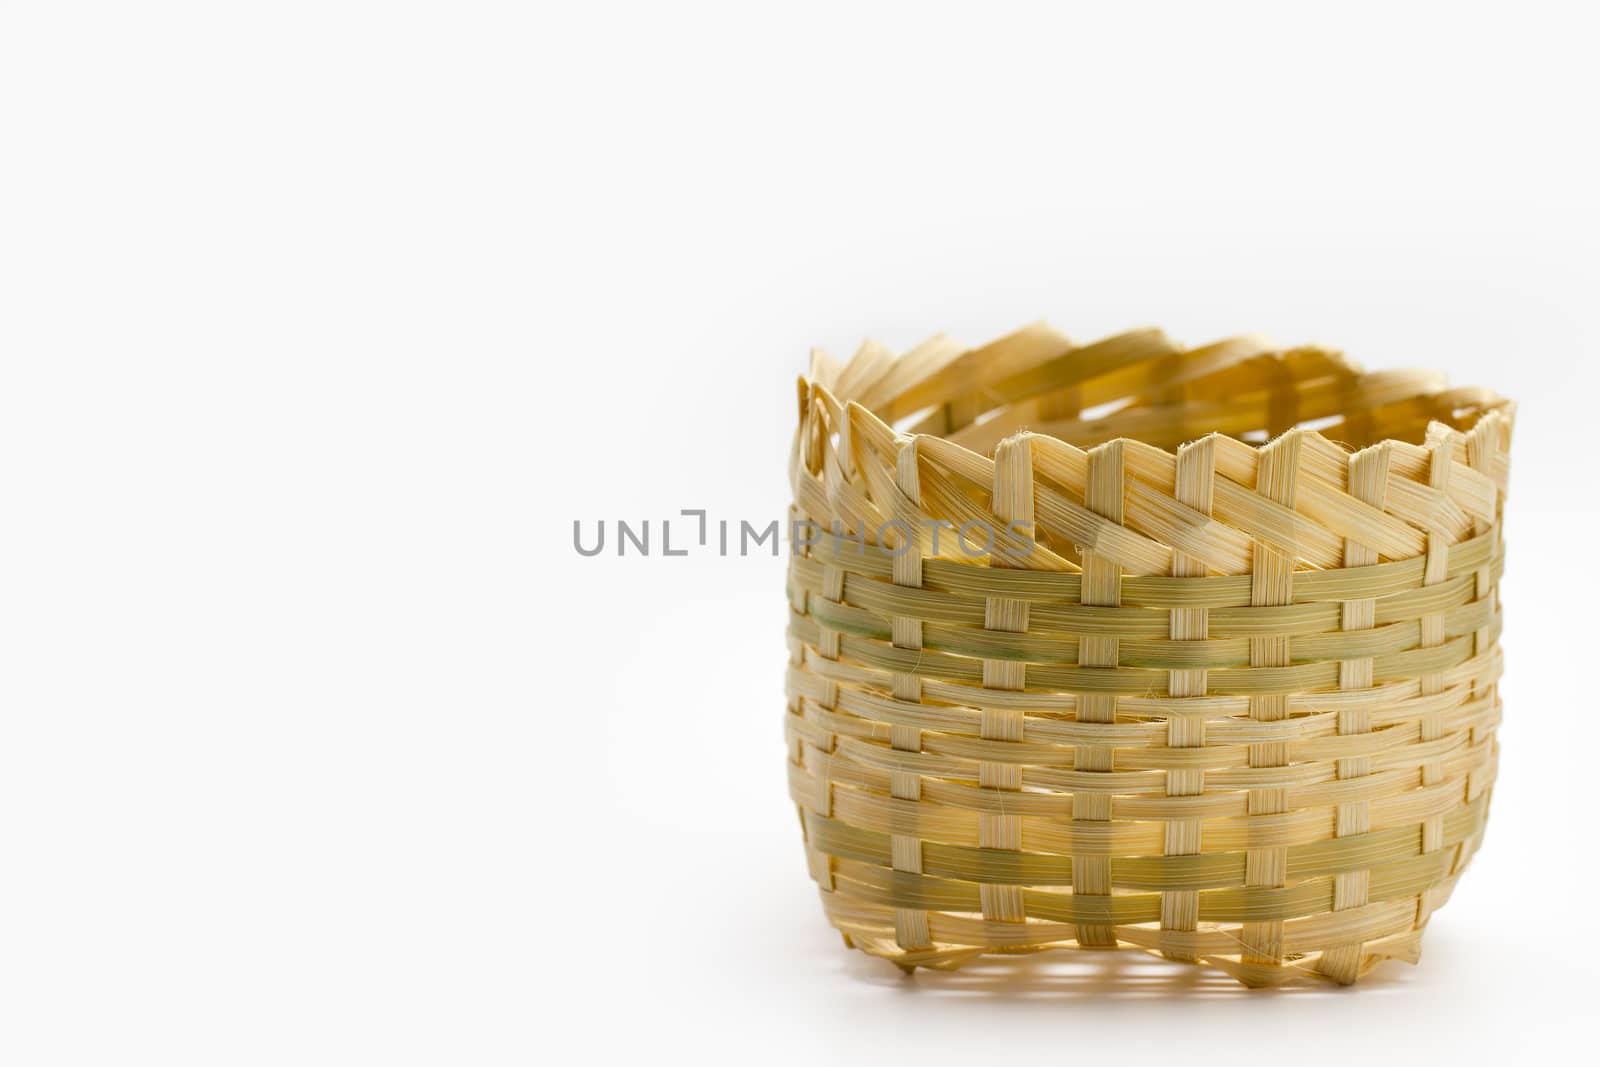 The small basket is made from bamboo, laid on white background. by SaitanSainam